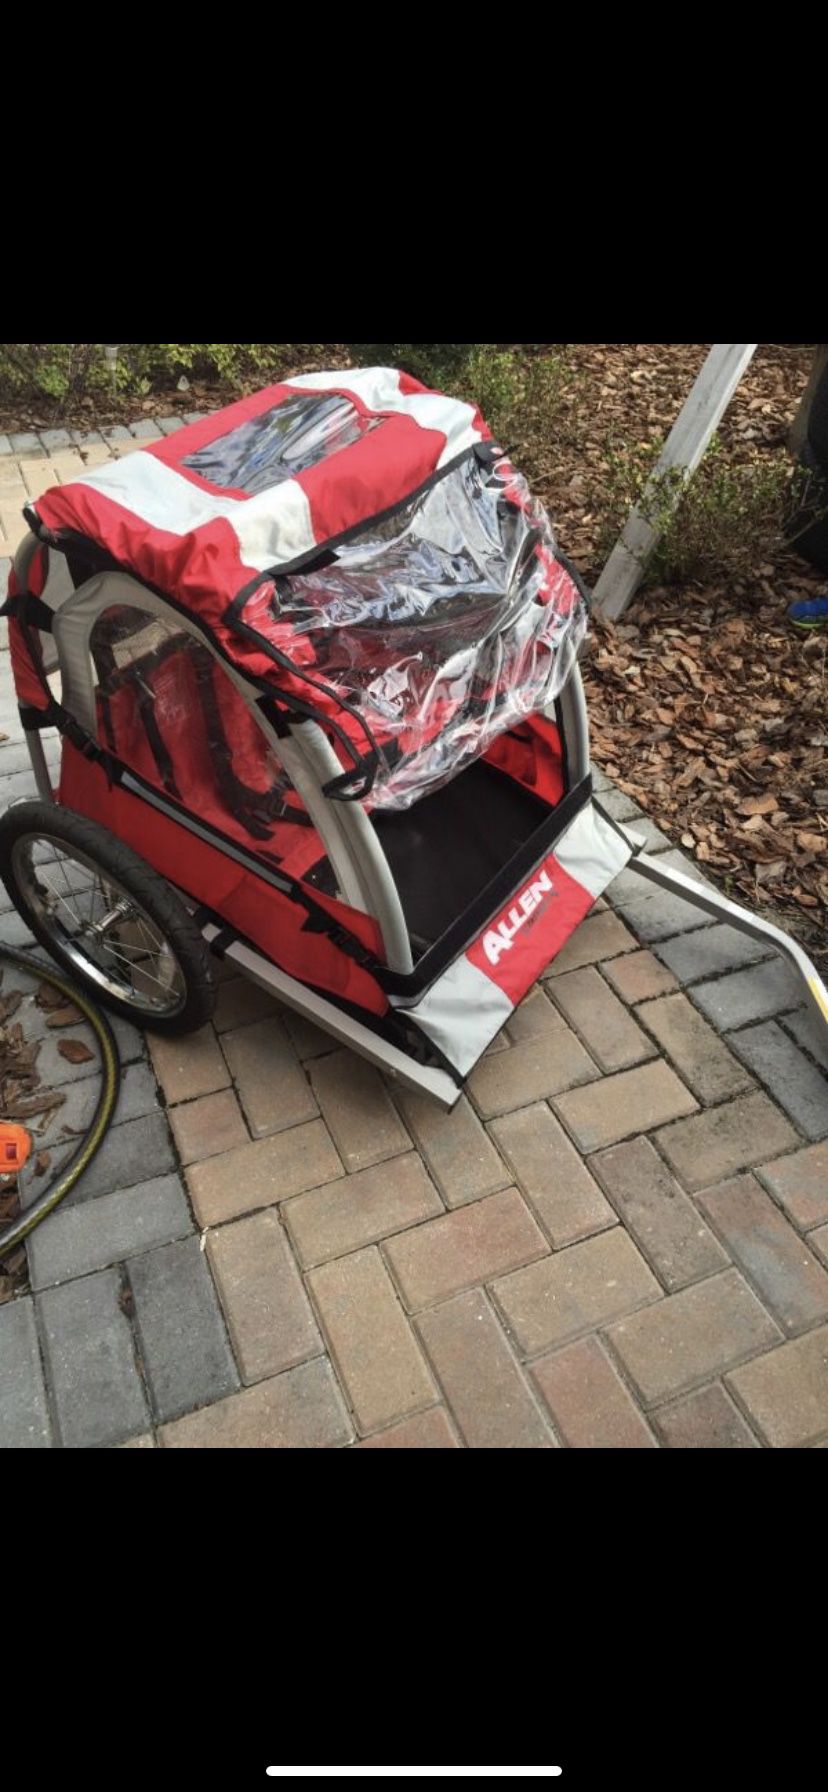 Allen two seater bike trailer like new hasn’t been used in years